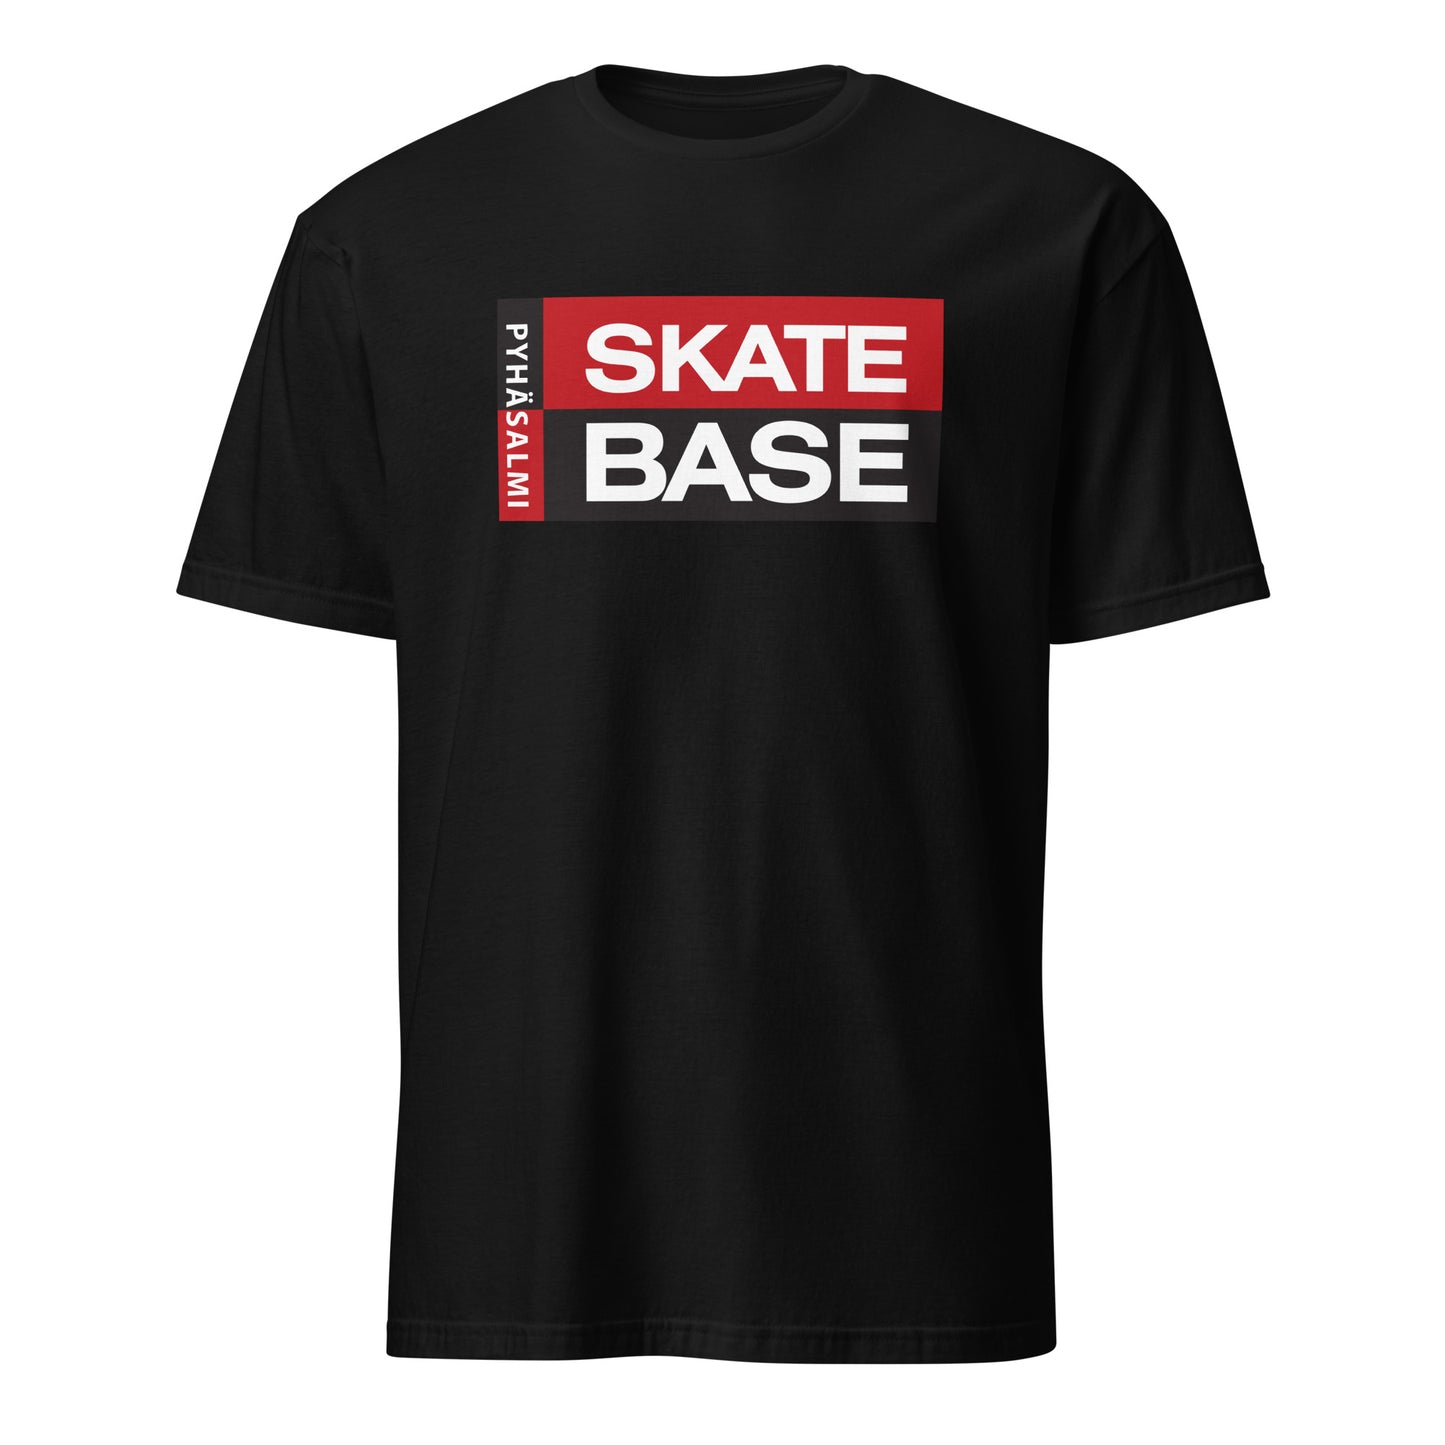 "Skate Base" unisex t-shirt (with front and back printing)